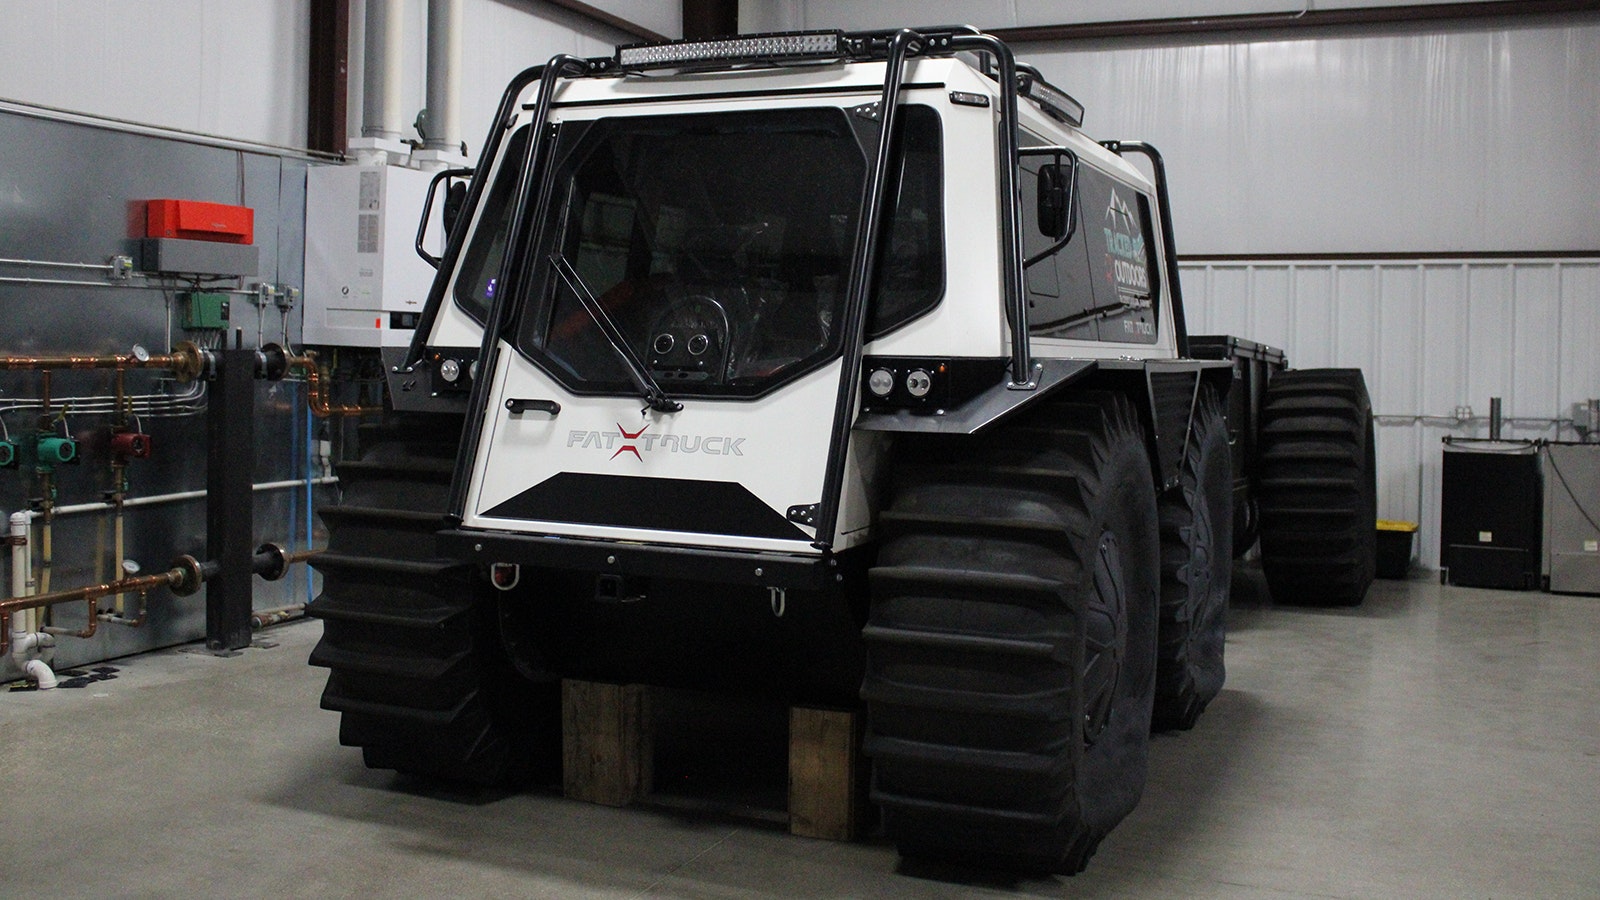 One of the Fat Trucks sold at Tracked Outdoors. These serious ATVs can cost $140,000 to $200,000.